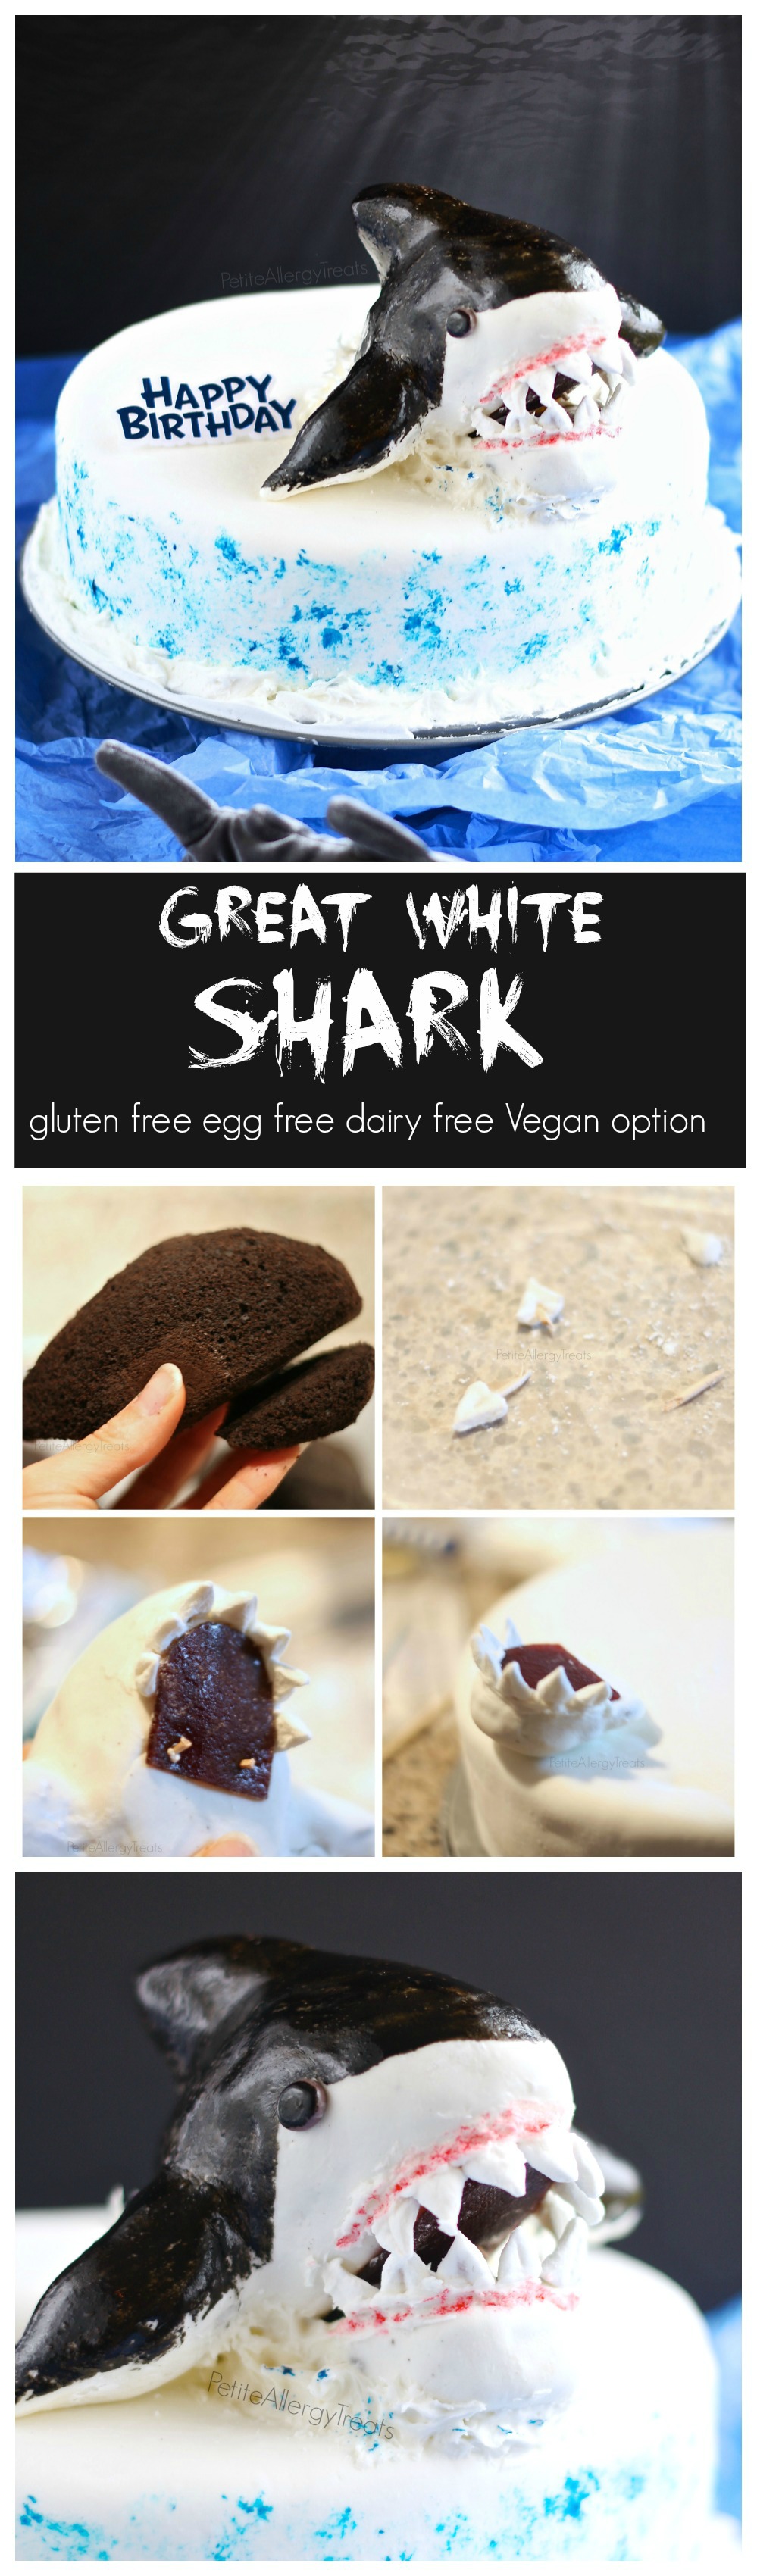 Shark Cake (egg free dairy free gluten free food allergies) This marshmallow fondant chocolate cake is a scary shark perfect for shark week or a birthday party. Sub Vegan marshmallows to make Vegan.